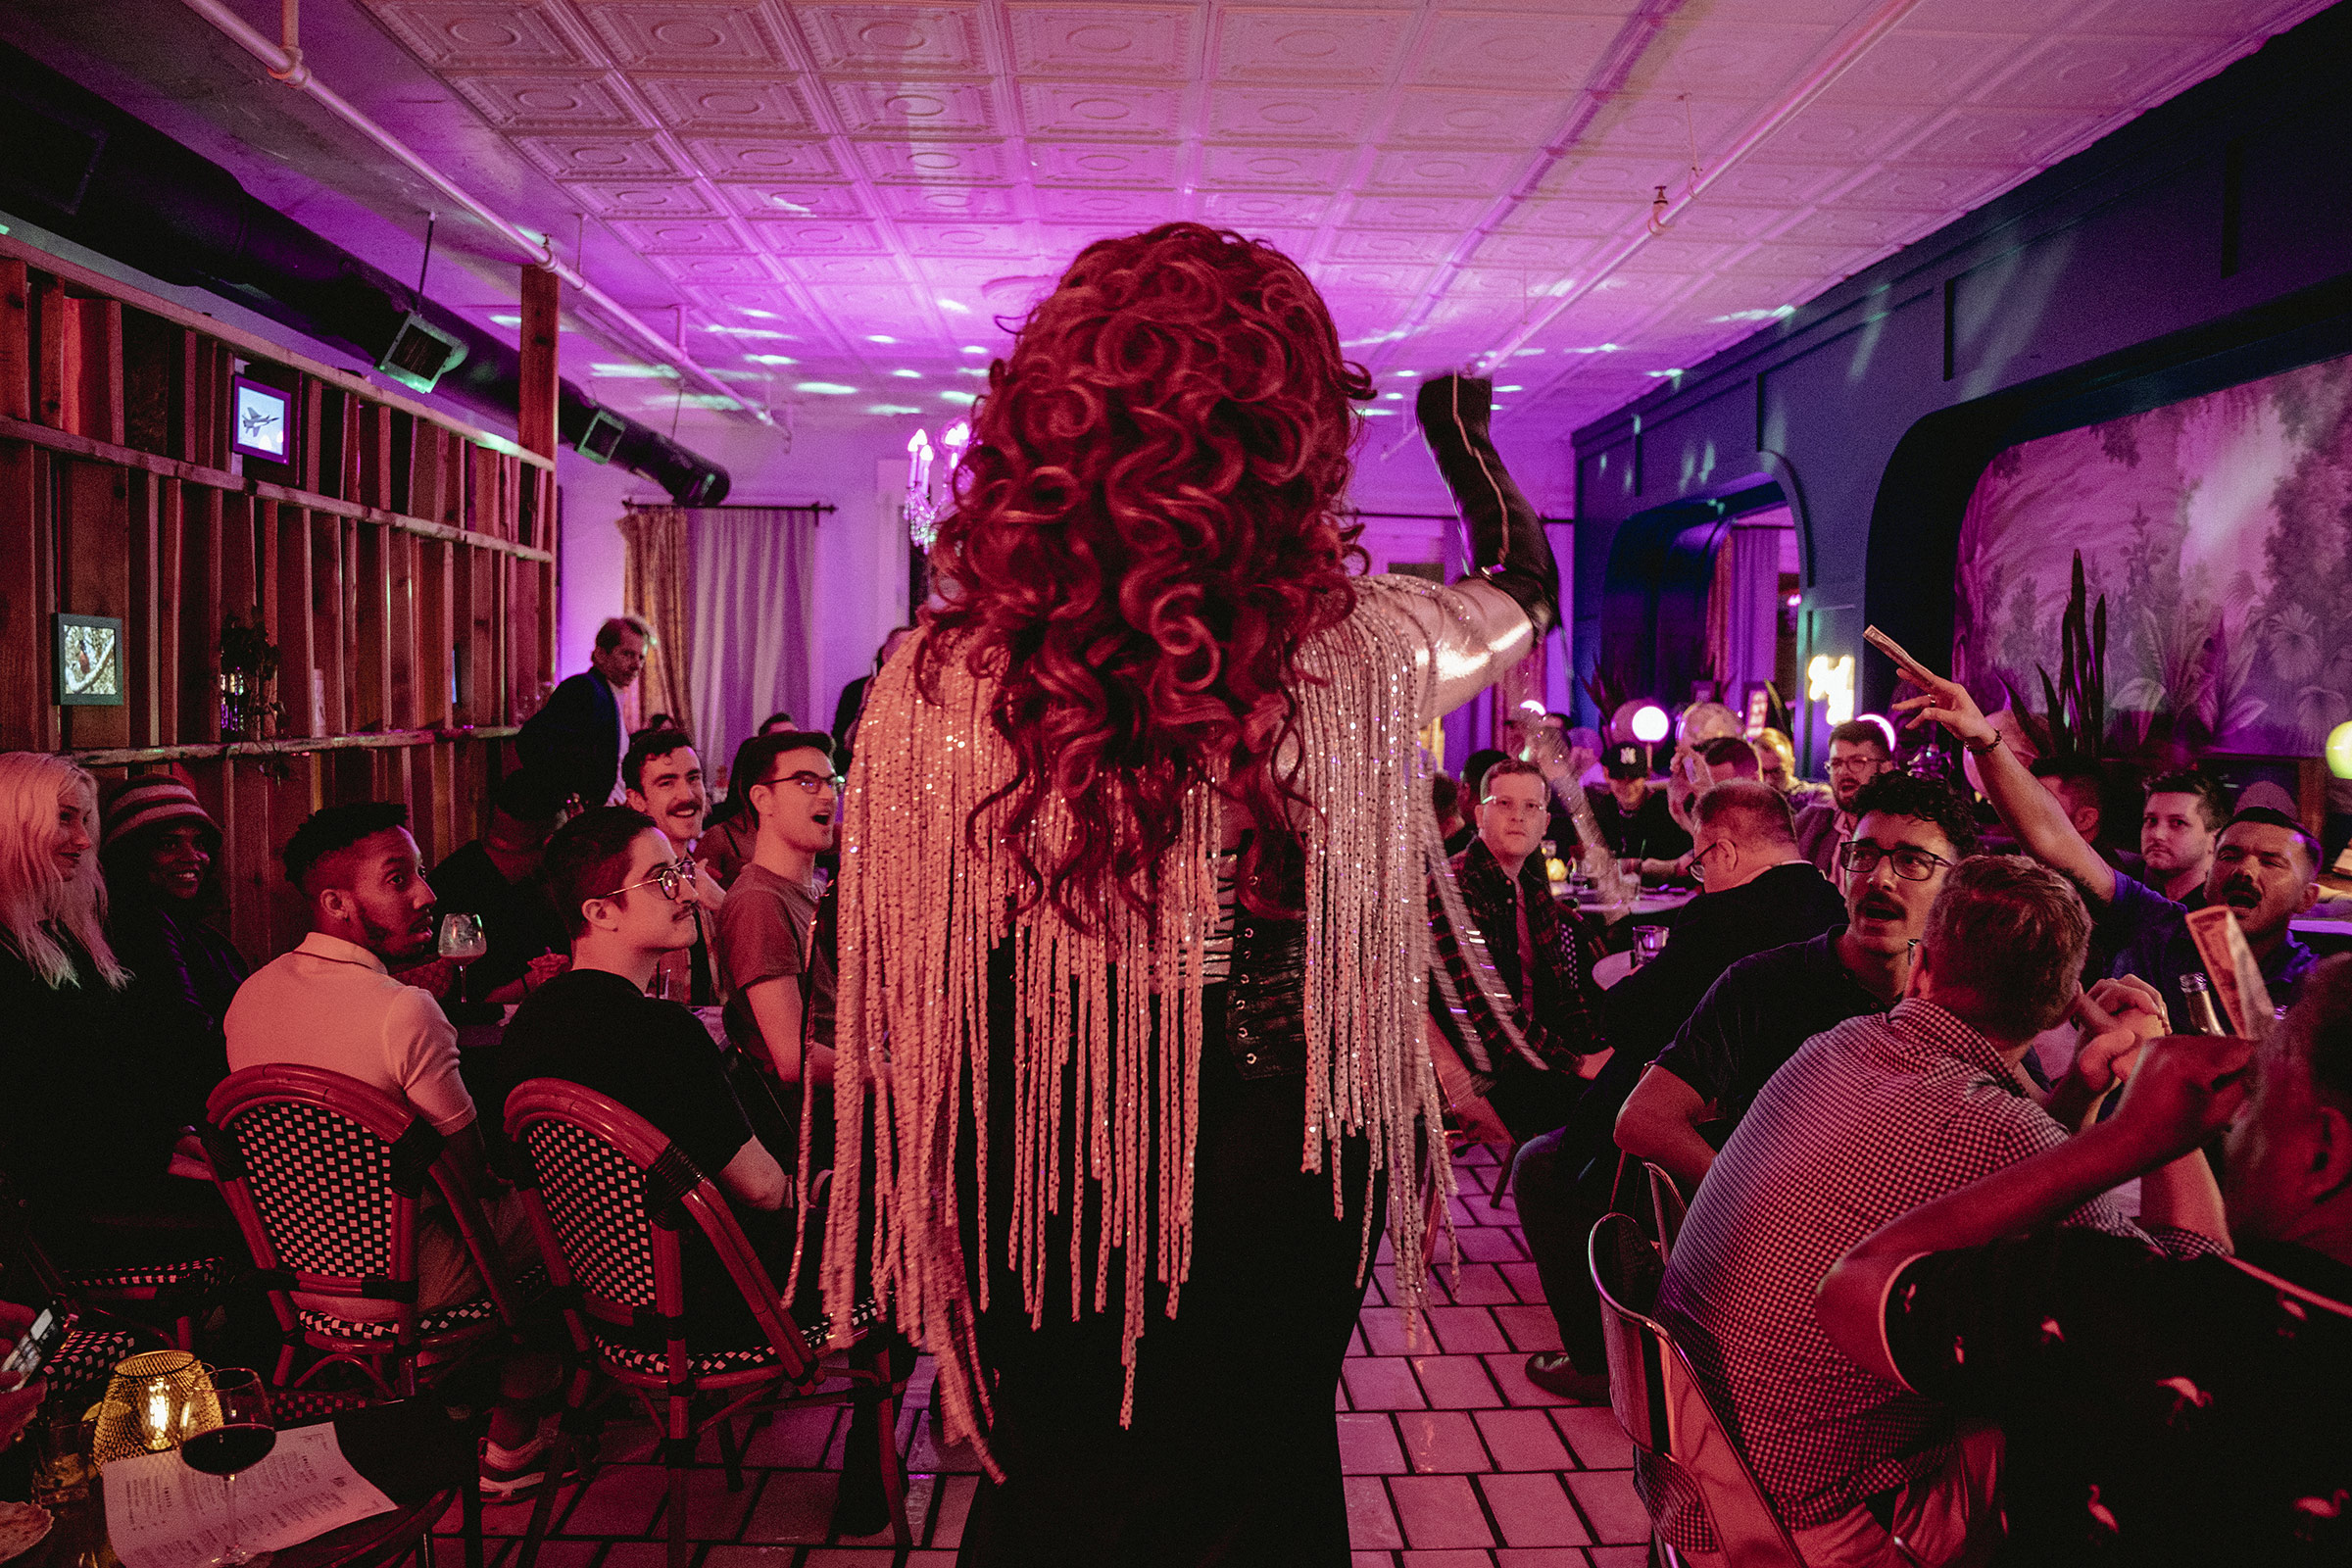 Keleigh Klarke performs at a drag show at IBIS in downtown Memphis, Tenn., on March 25. (Andrea Morales for TIME)